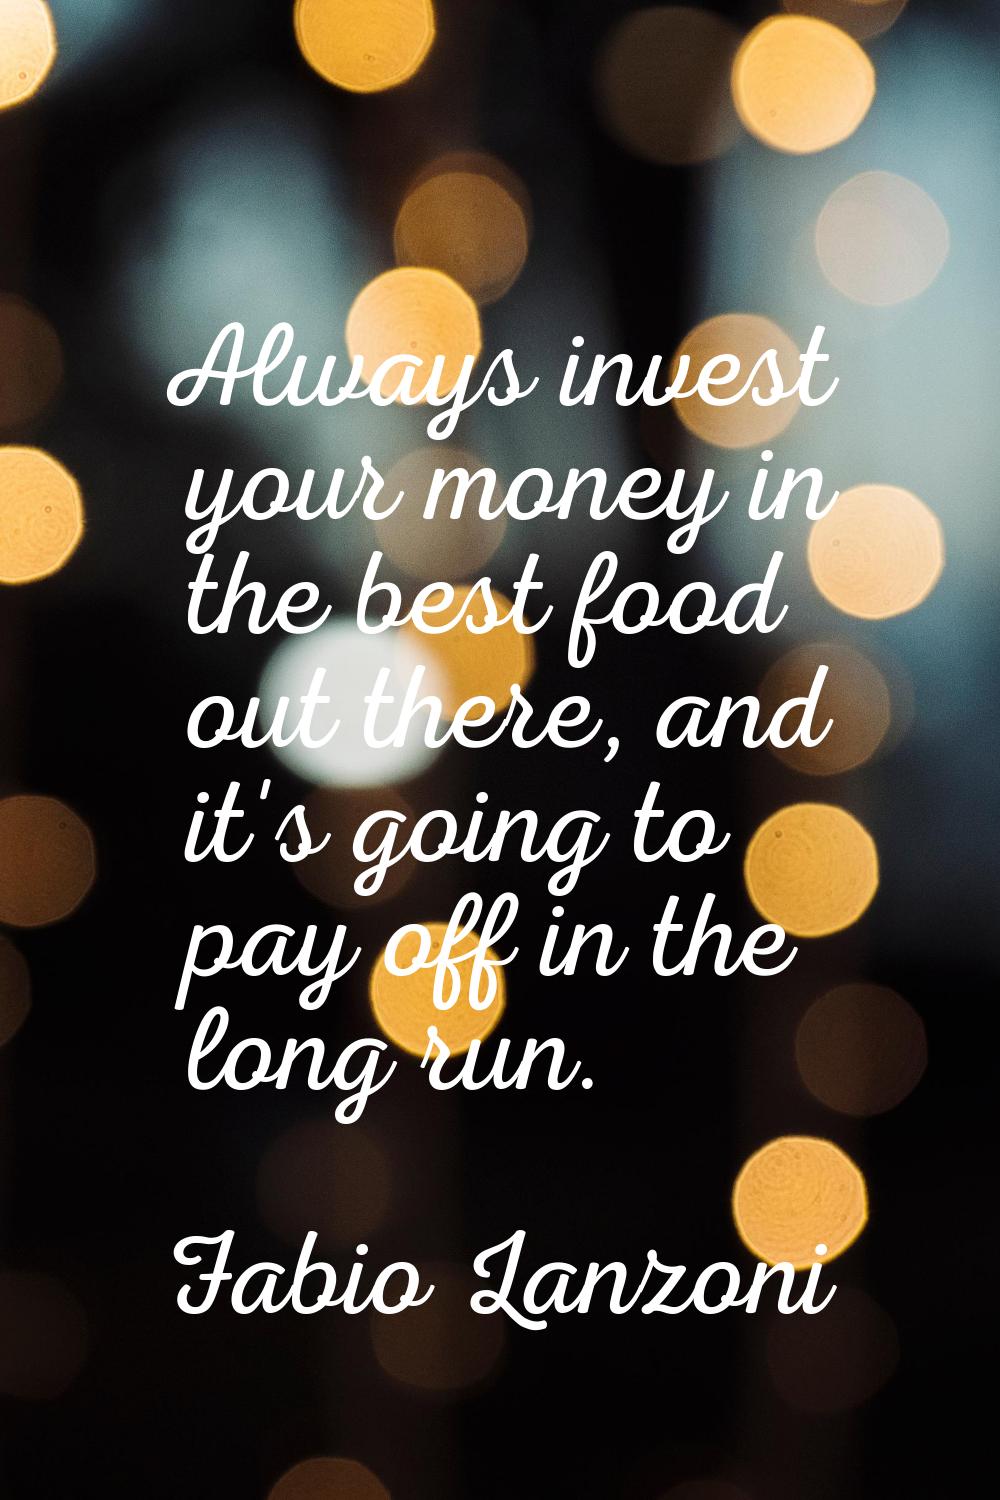 Always invest your money in the best food out there, and it's going to pay off in the long run.